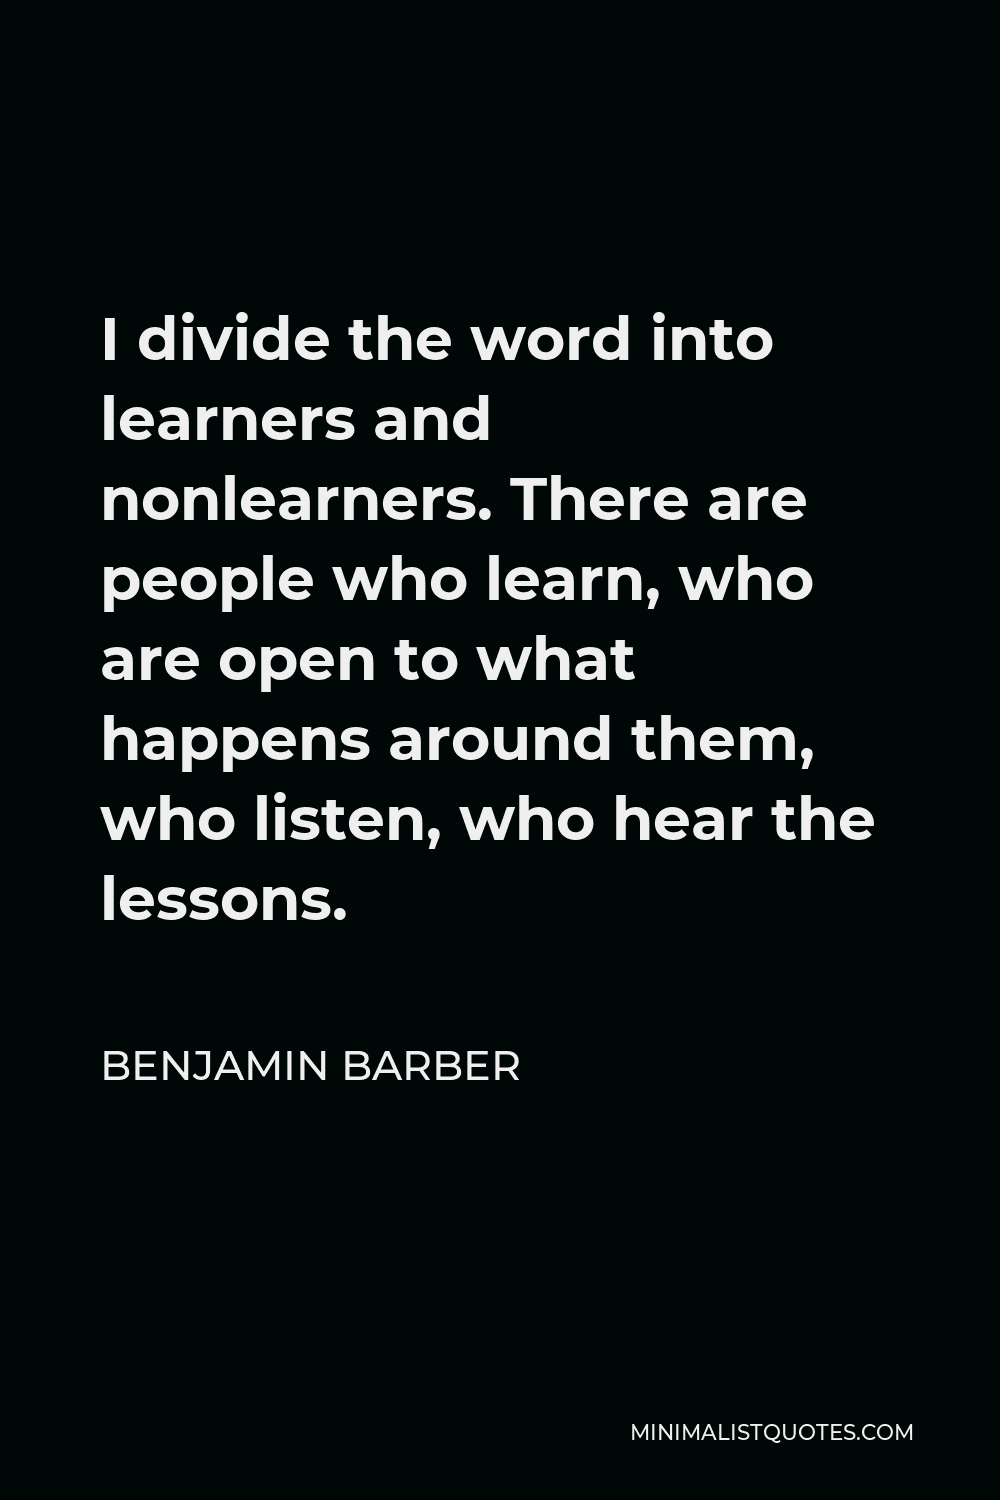 Benjamin Barber Quote - I divide the word into learners and nonlearners. There are people who learn, who are open to what happens around them, who listen, who hear the lessons.